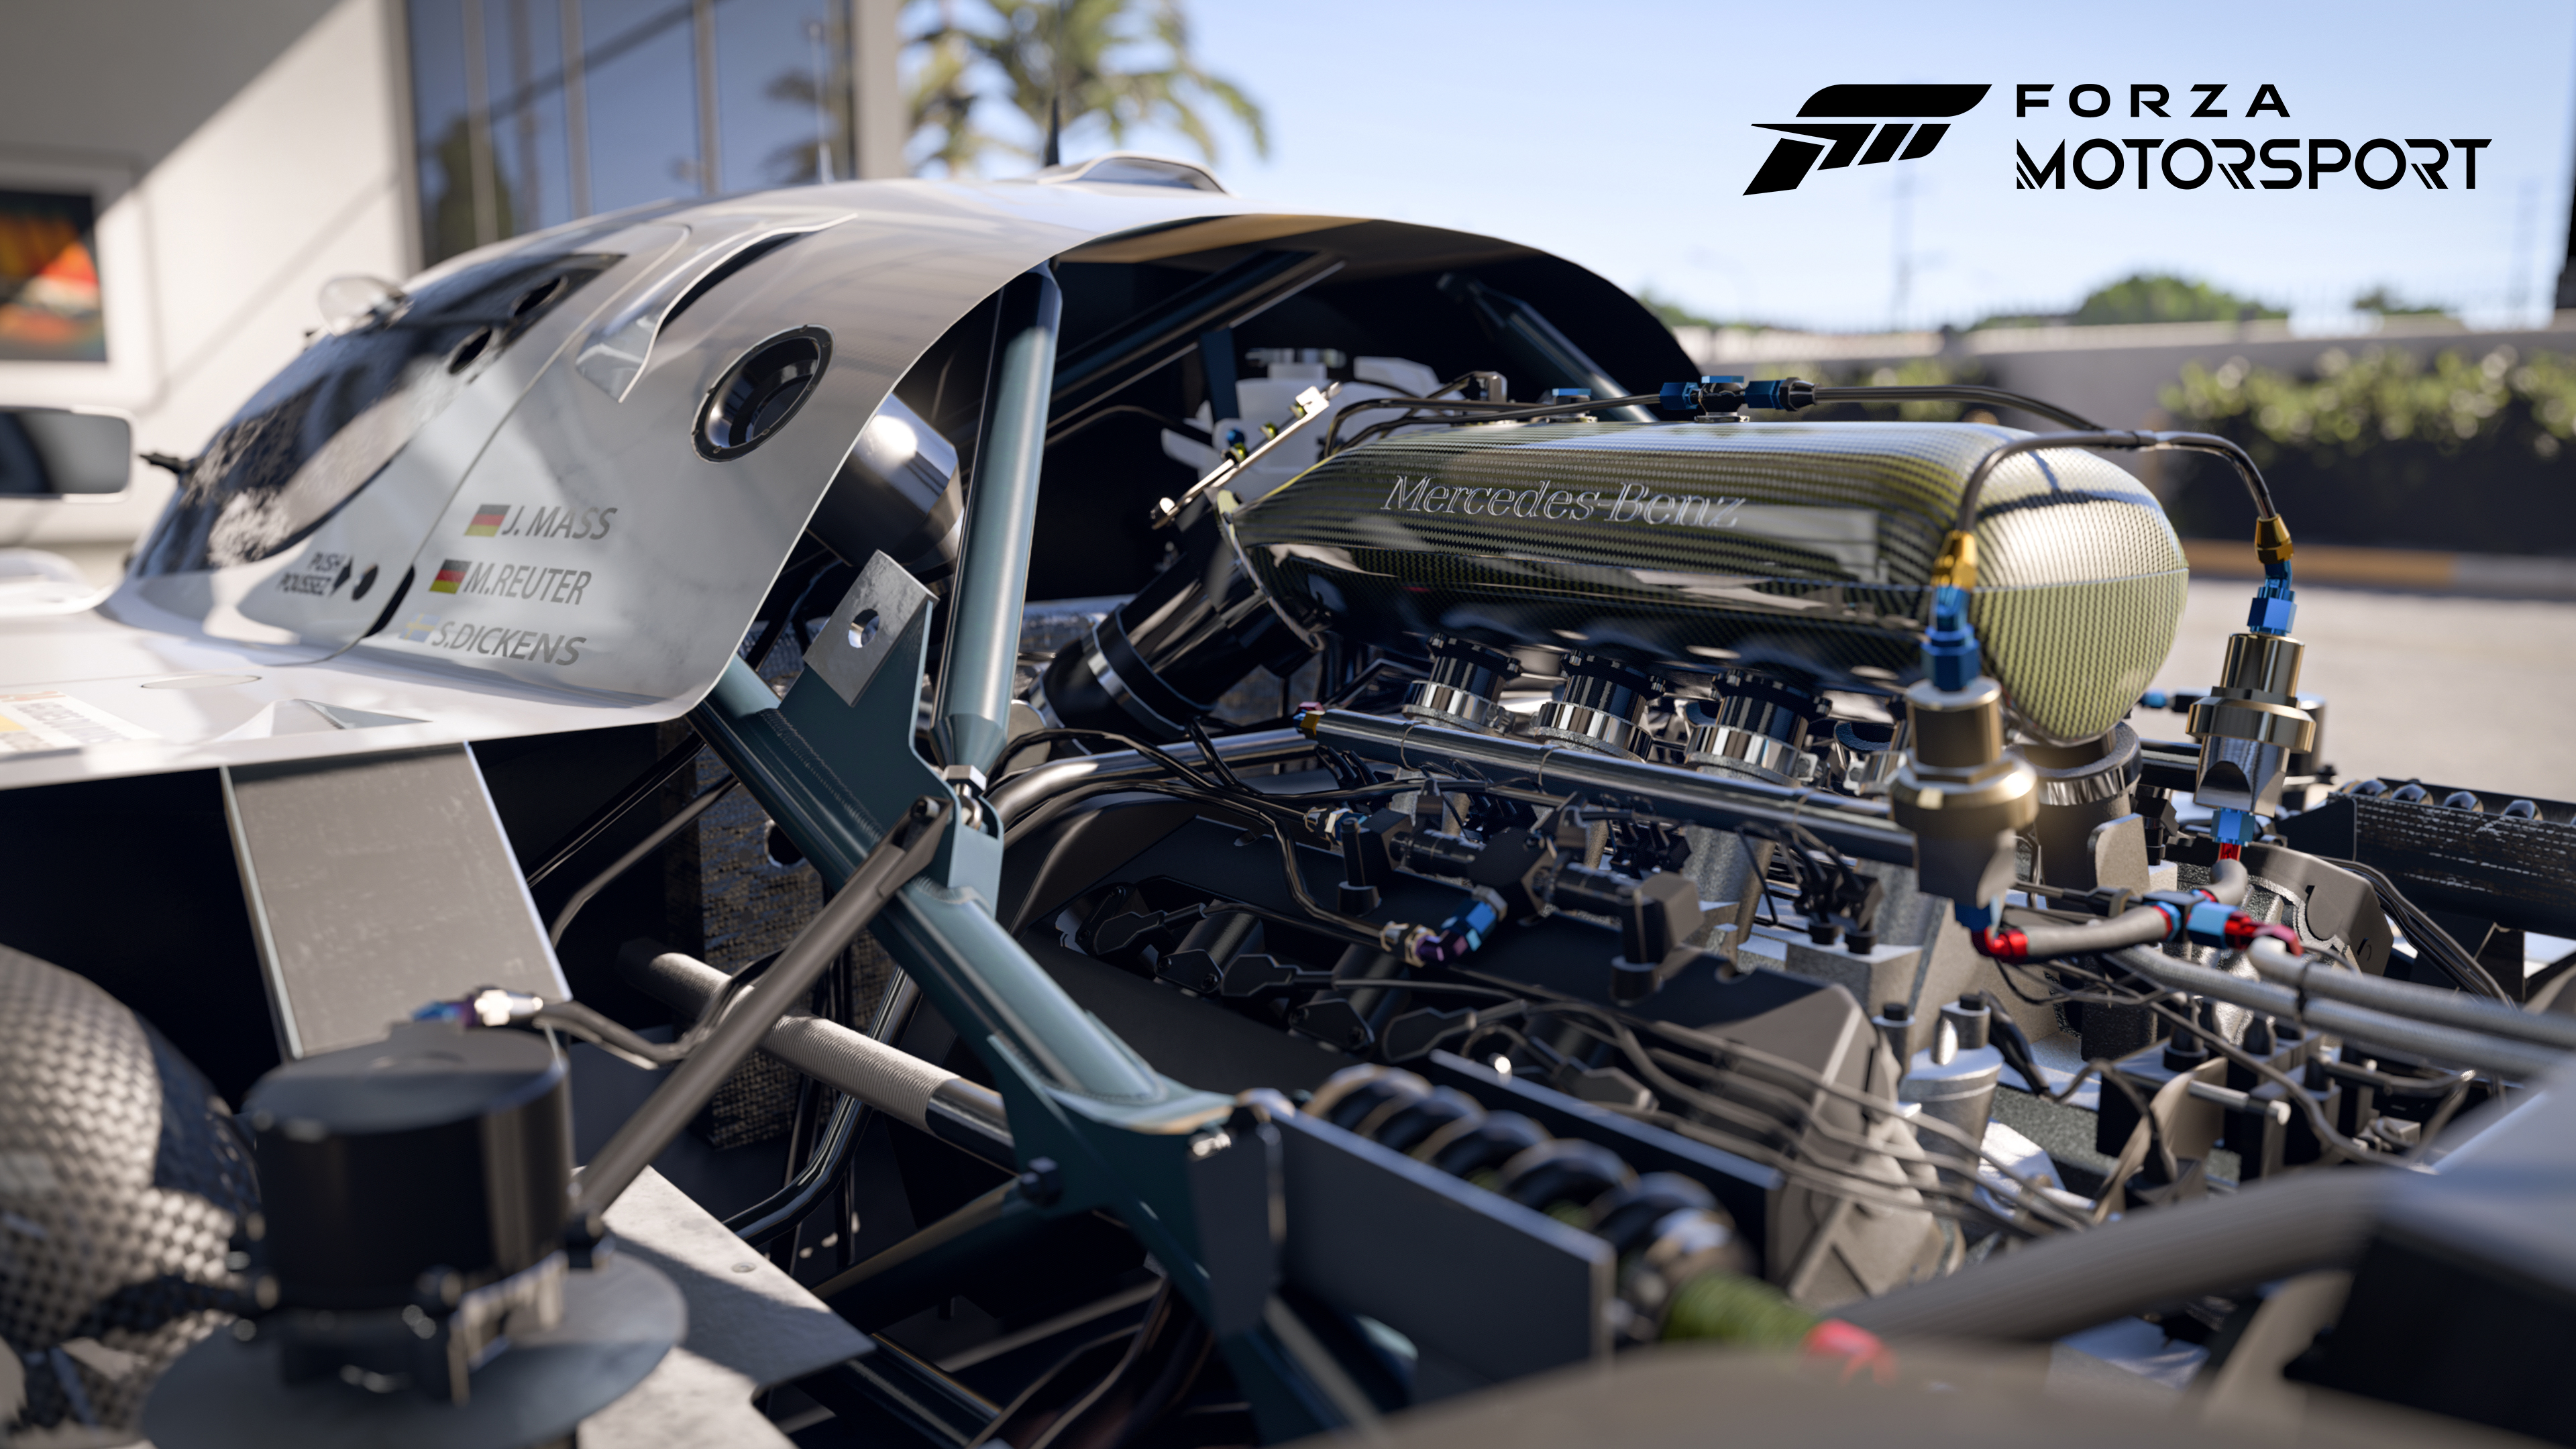 The Forza Motorsport 5 Car List Grows to 130 Vehicles